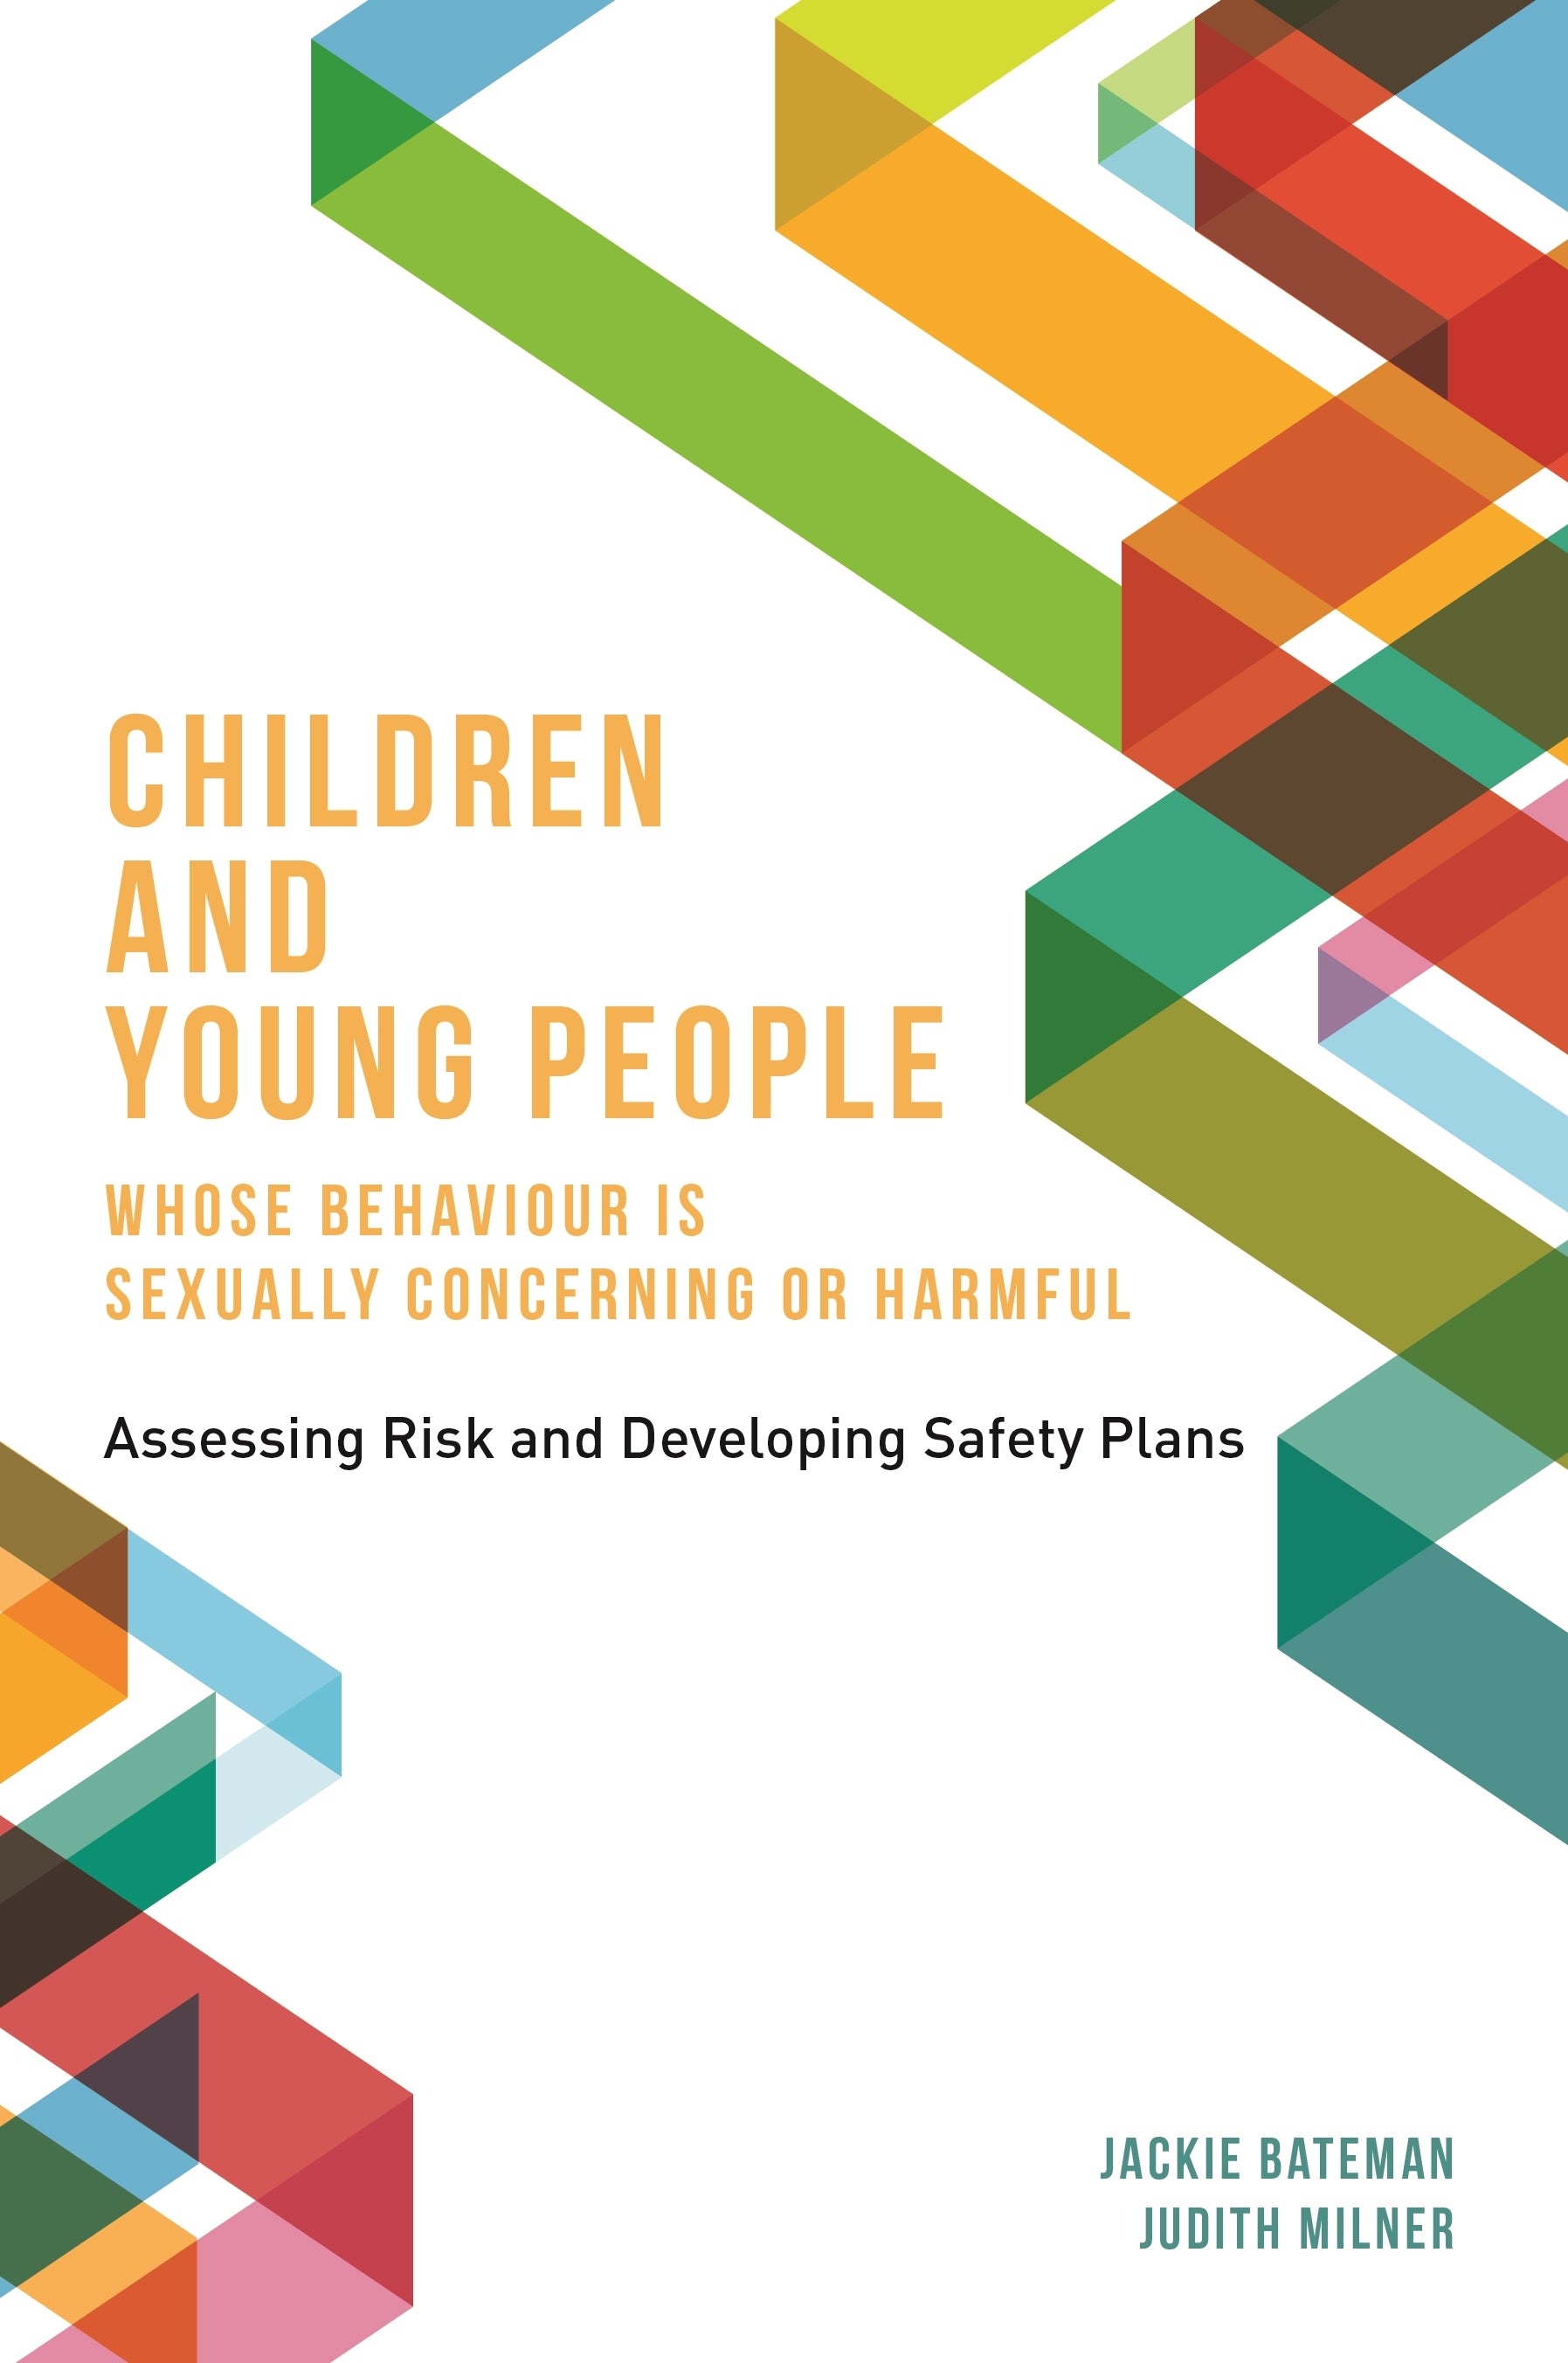 Children and Young People Whose Behaviour is Sexually Concerning or Harmful by Jackie Bateman, Judith Milner